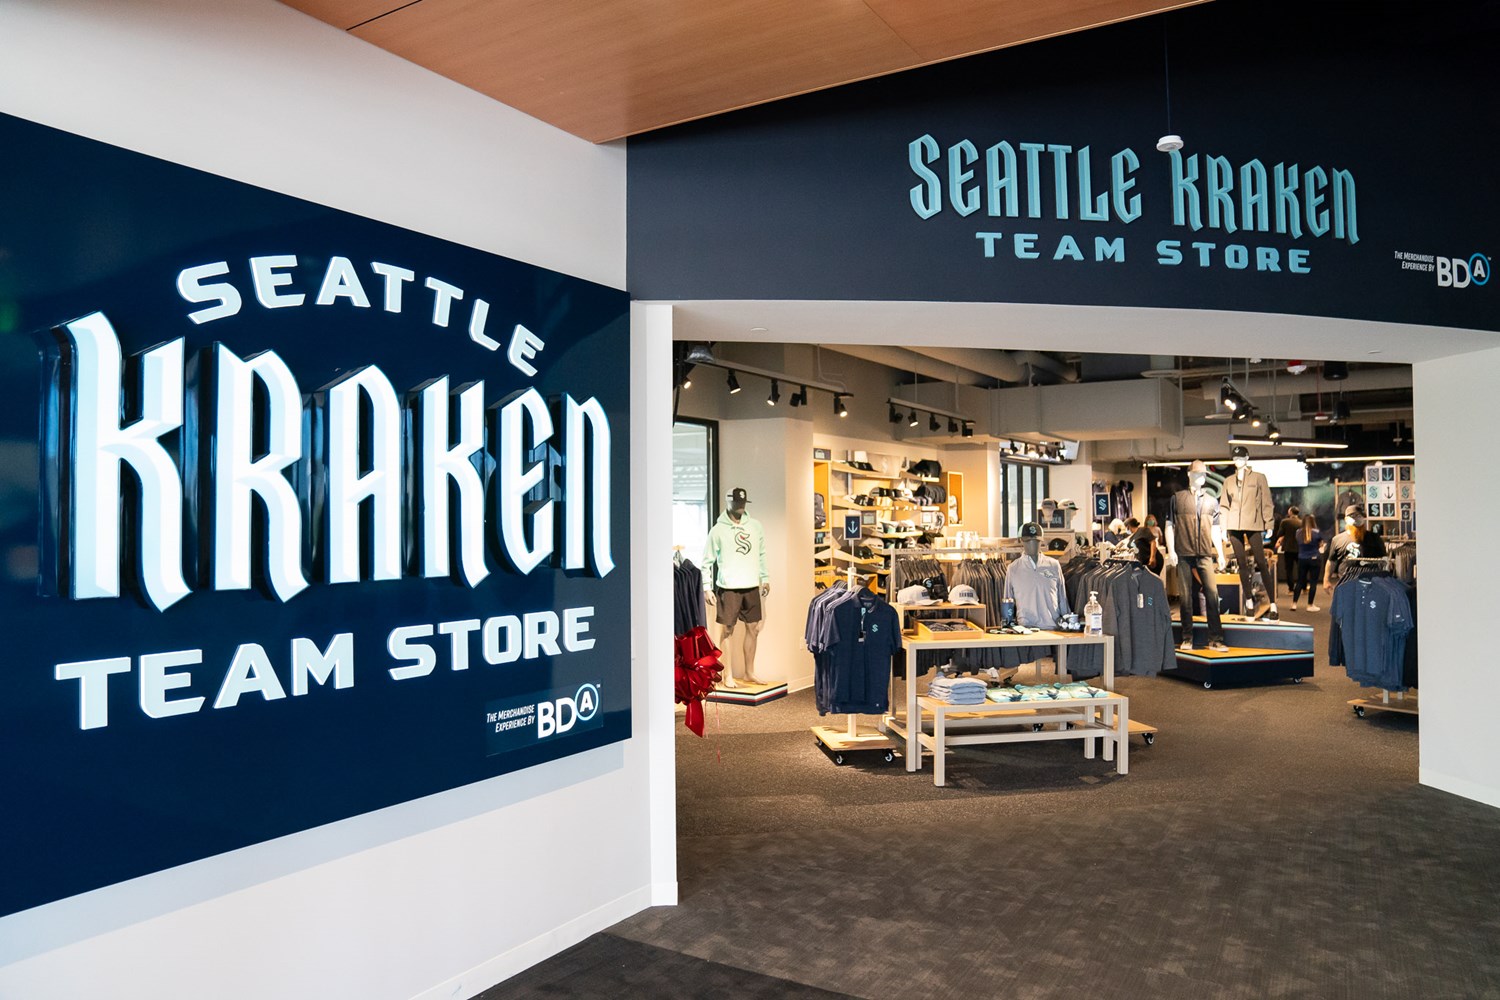 Seattle Kraken team store to finally open this Friday: report